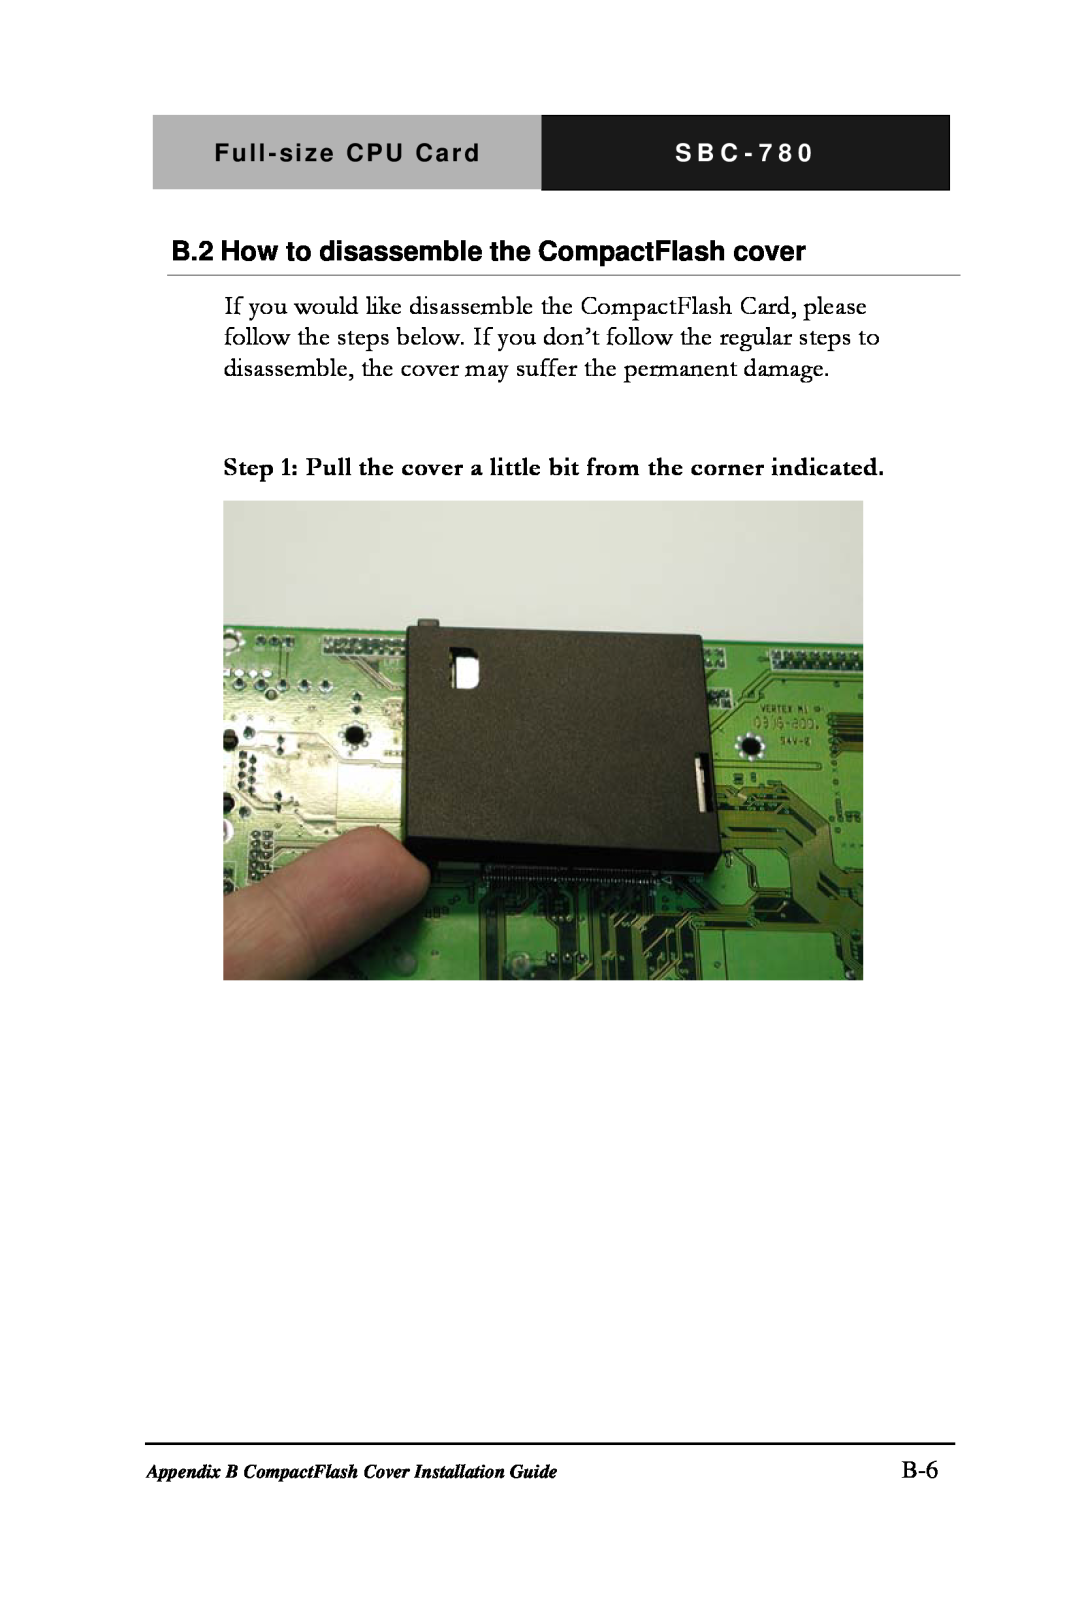 Intel SBC-780 B.2 How to disassemble the CompactFlash cover, S B C - 7 8, Appendix B CompactFlash Cover Installation Guide 